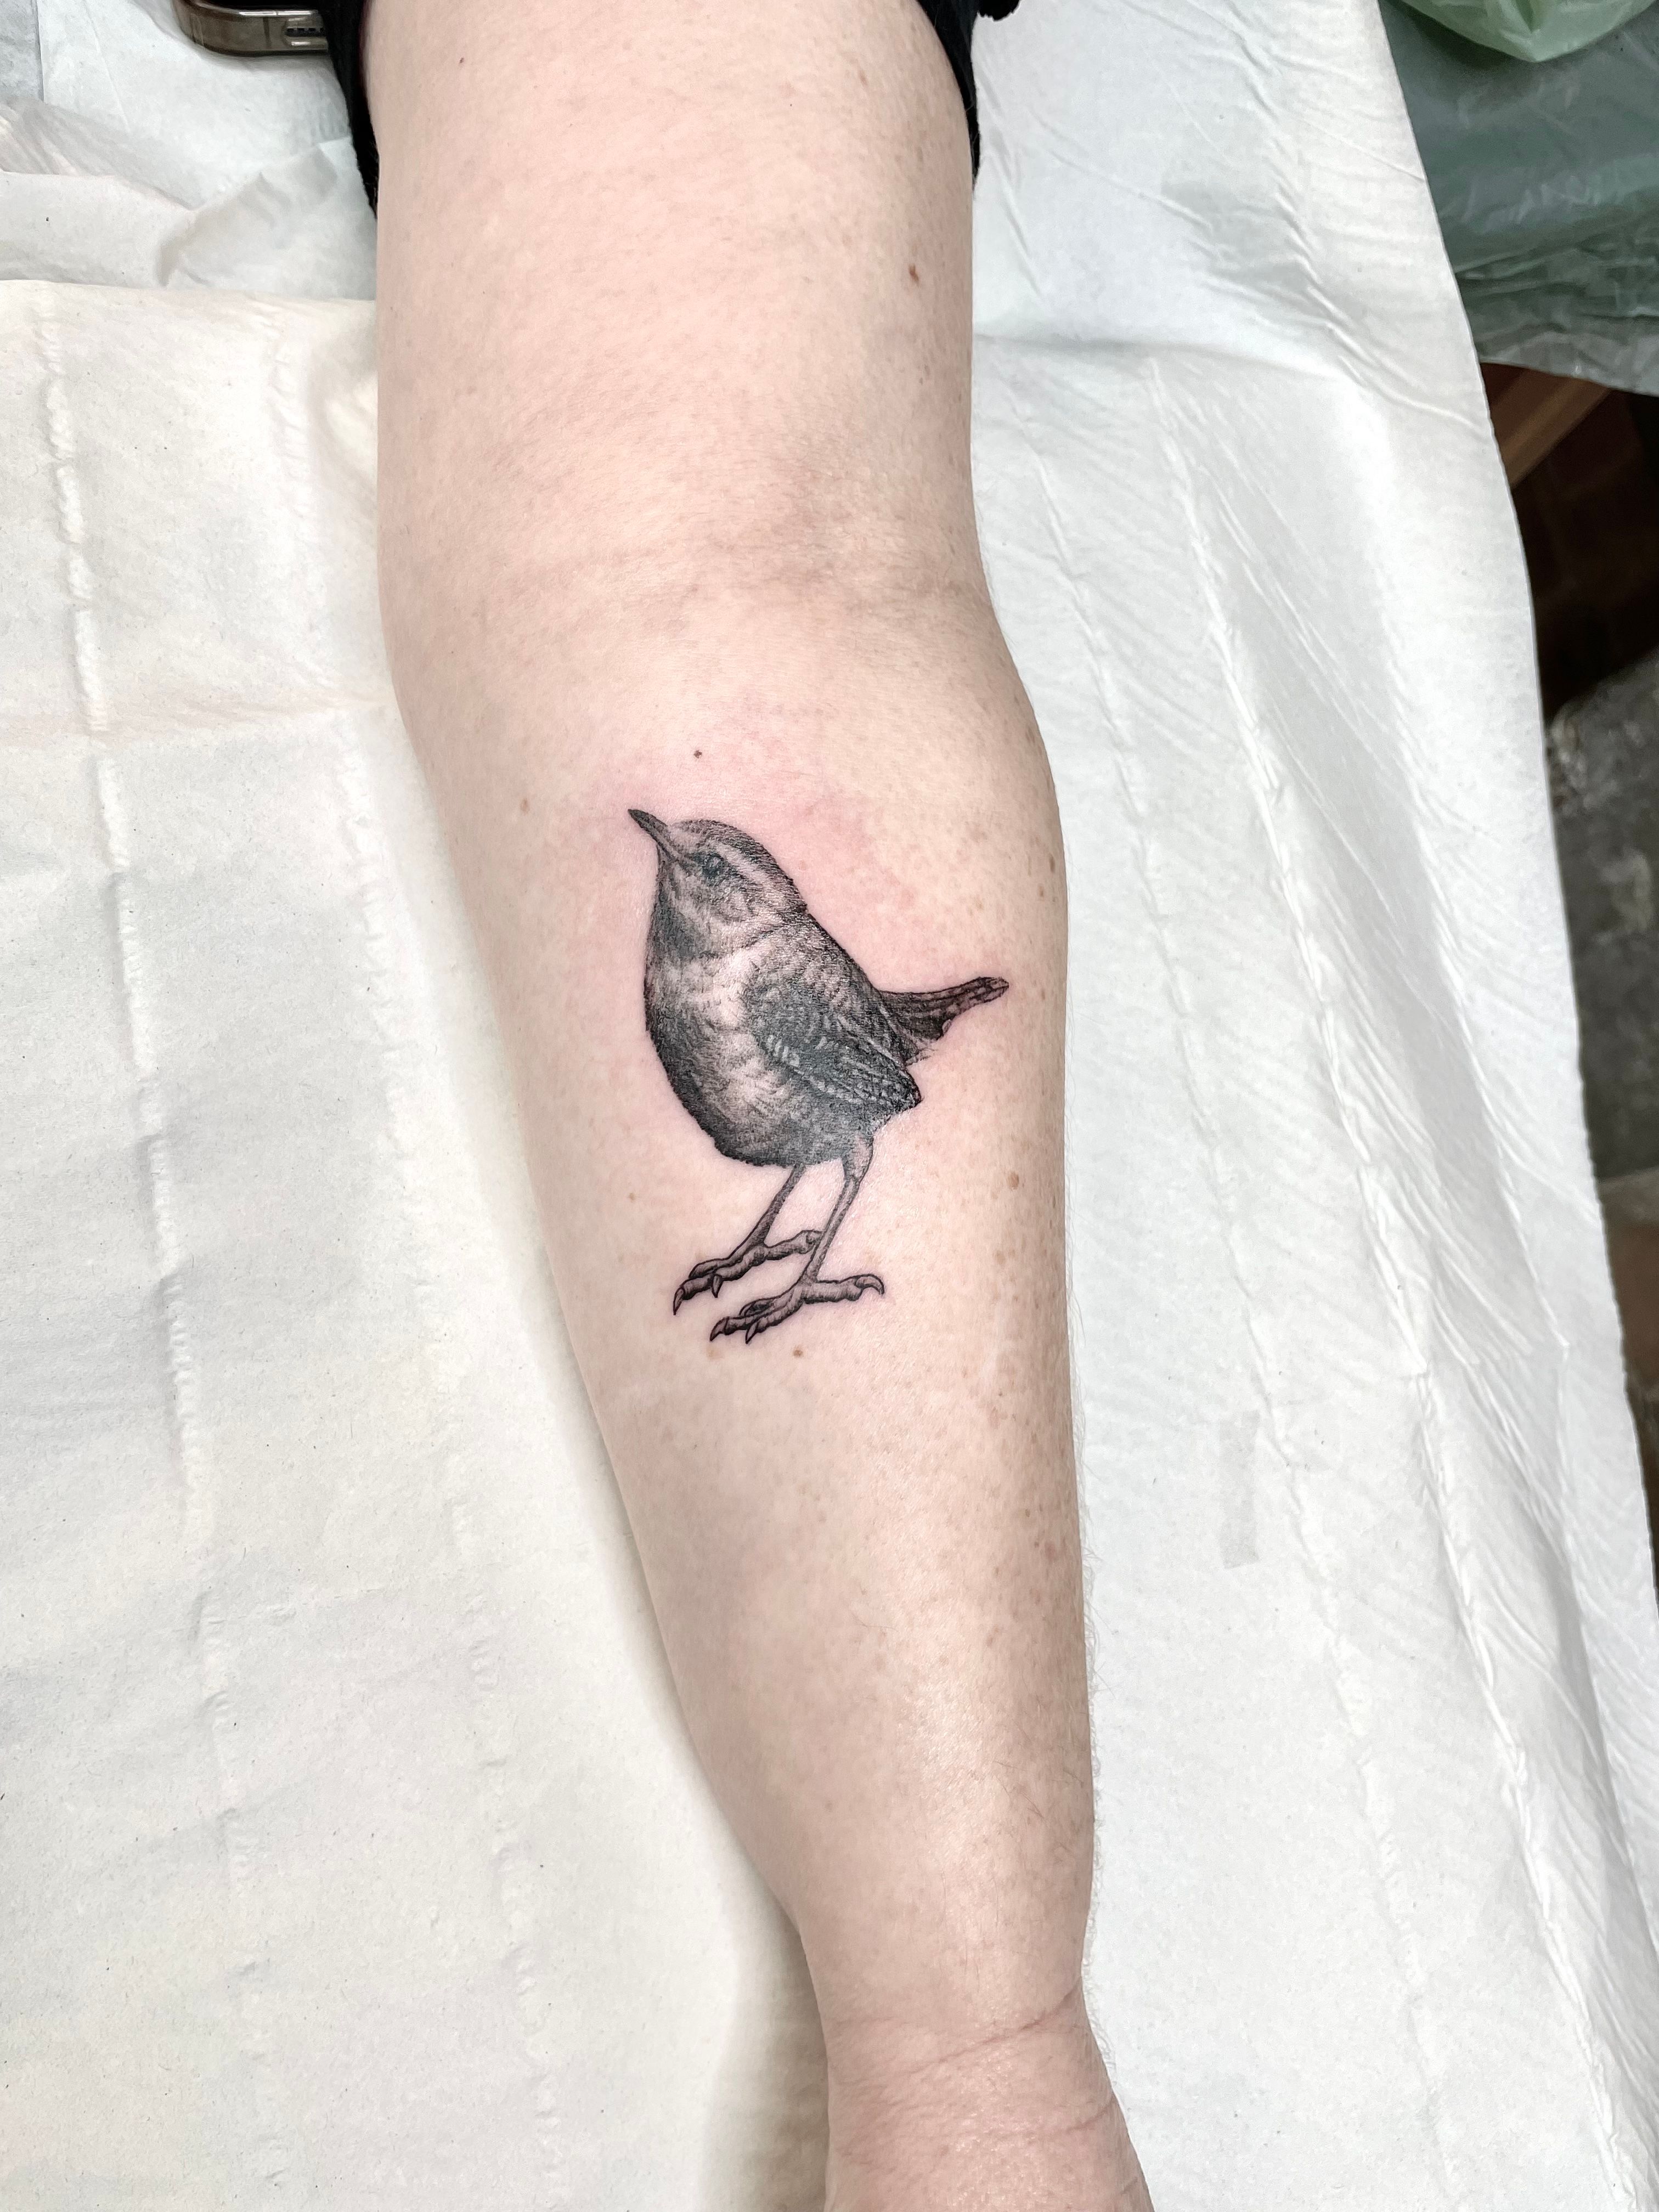 Bone Shaker Tattoos and Body Art  A little blue Wren from last year done  by Tom tomquinert bird birds nature animal feather shading tattoo  tattoos tattooing tattooist tattooed tat instatattoo ink 